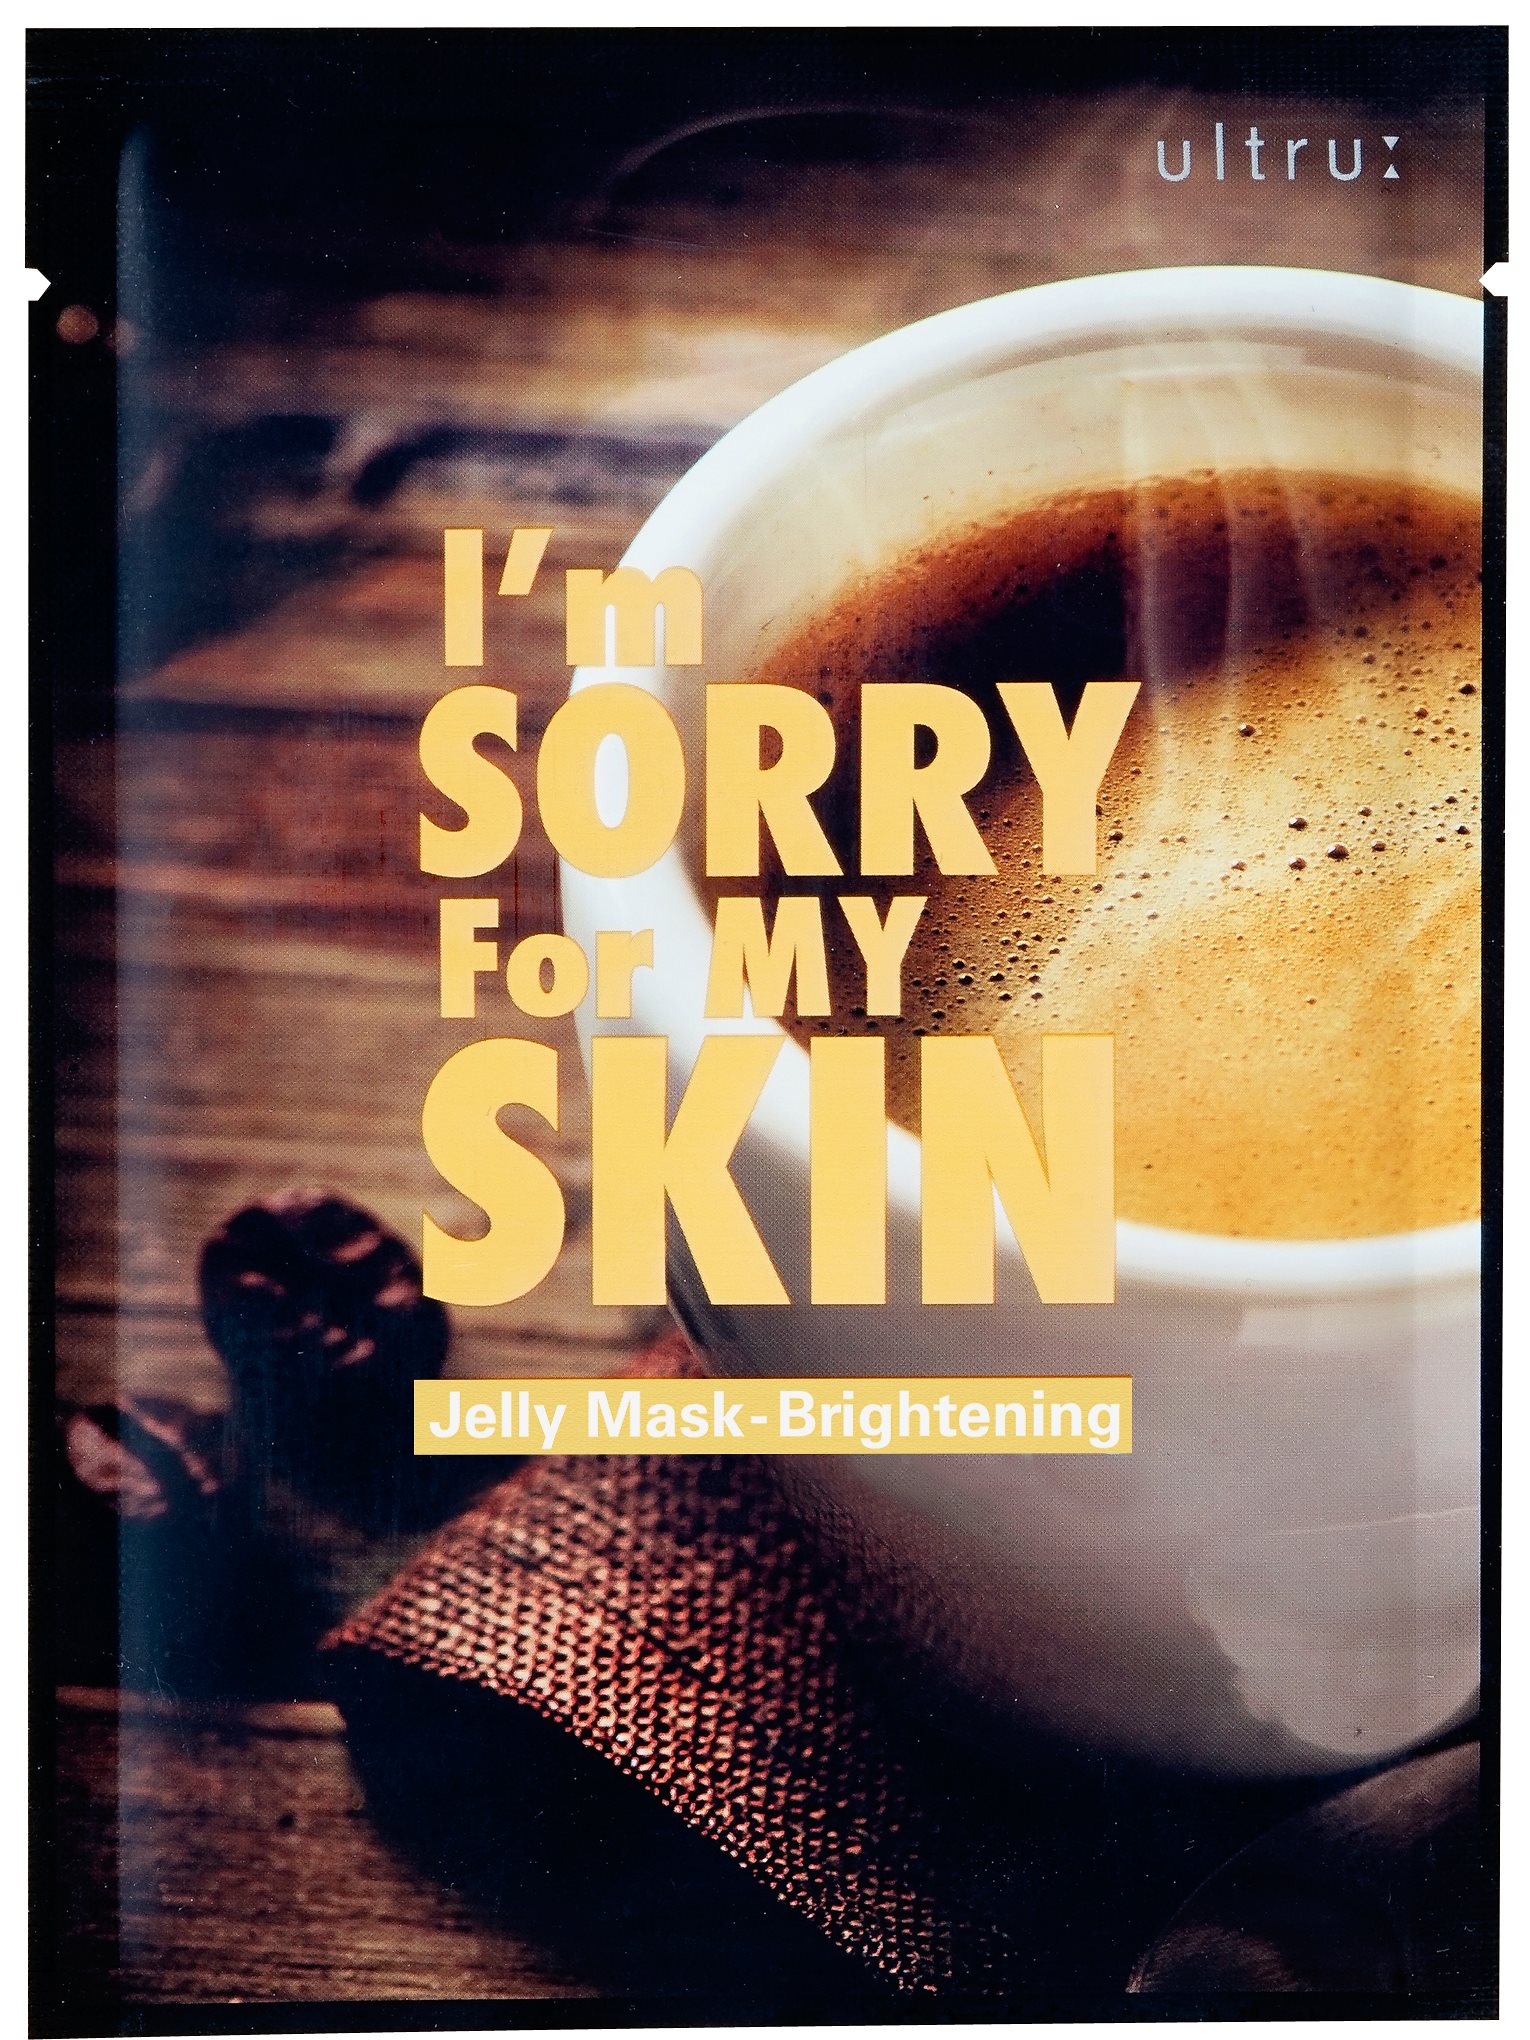 [I m Sorry for My Skin]Jelly Mask -Brightening